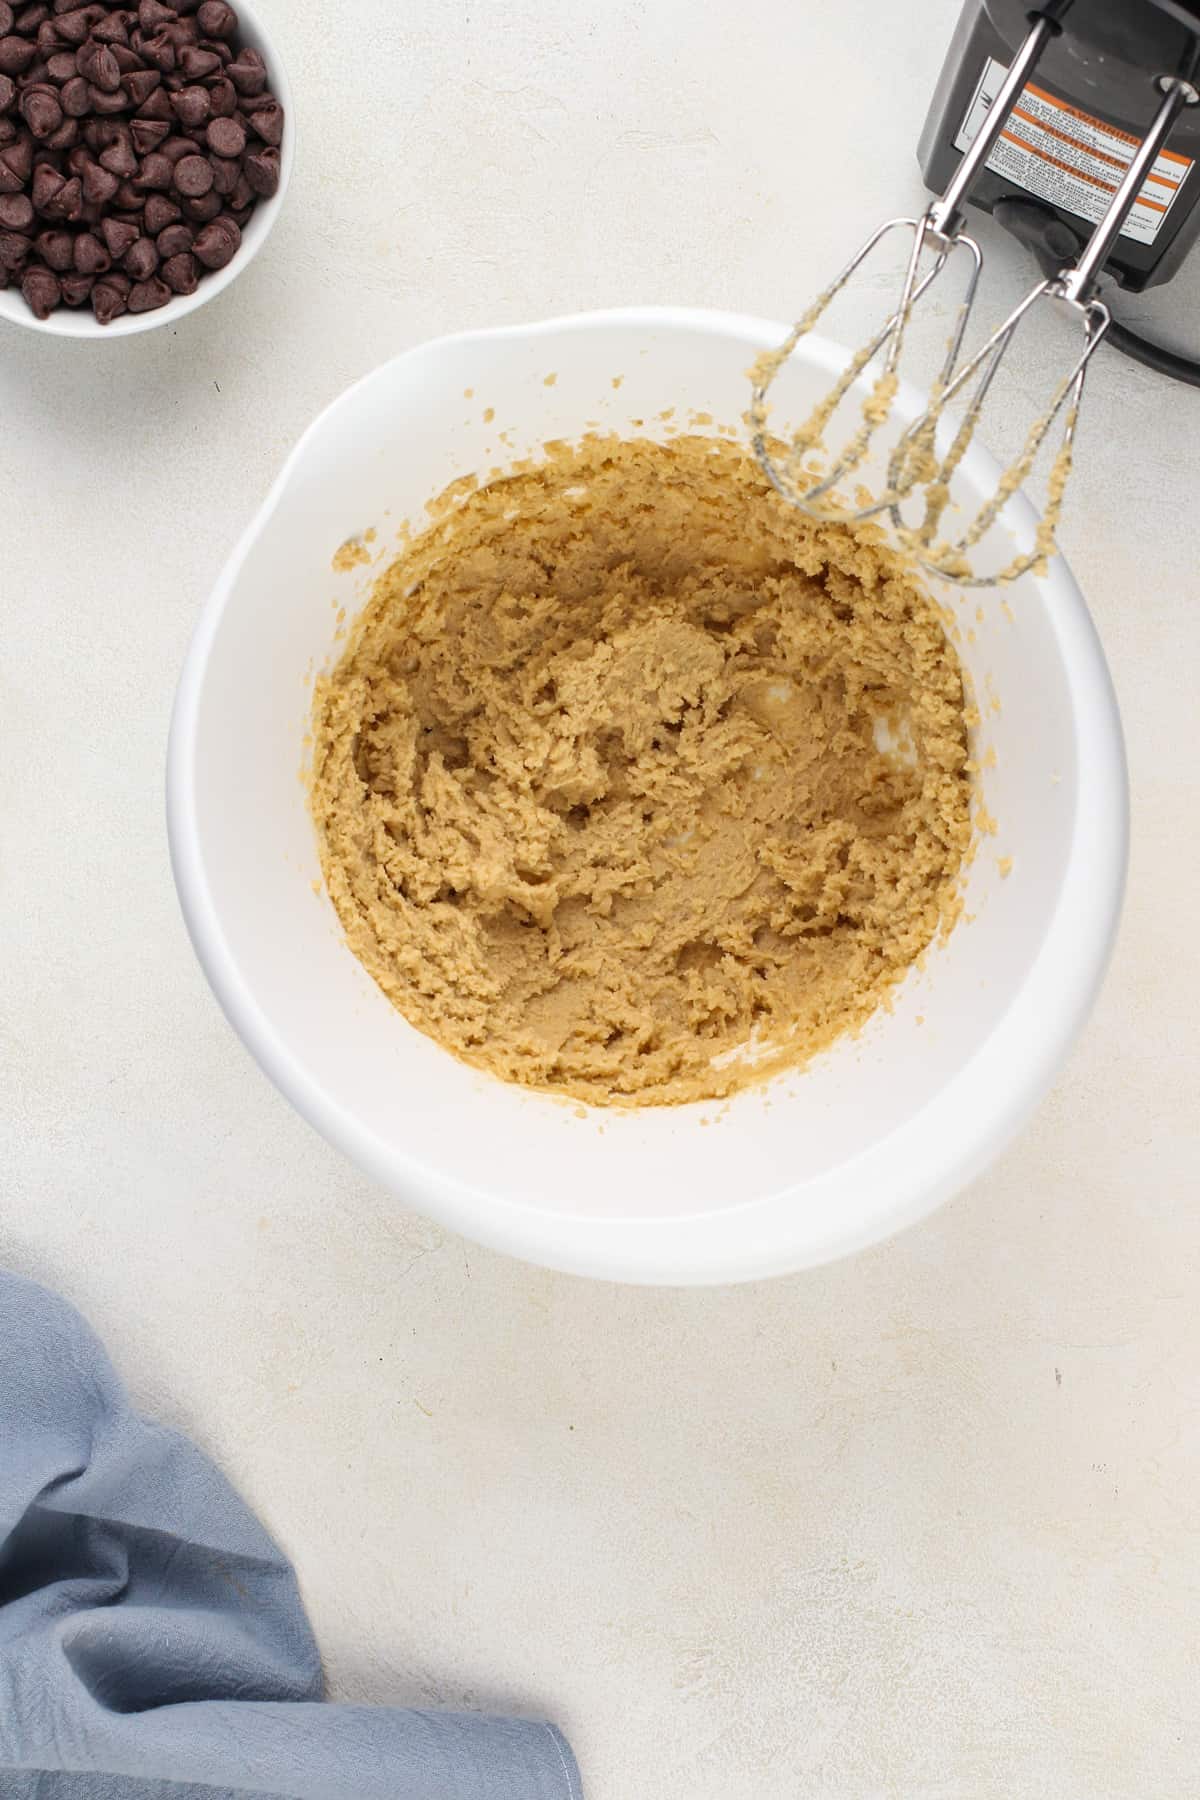 Butter and brown sugar creamed together in a white mixing bowl.